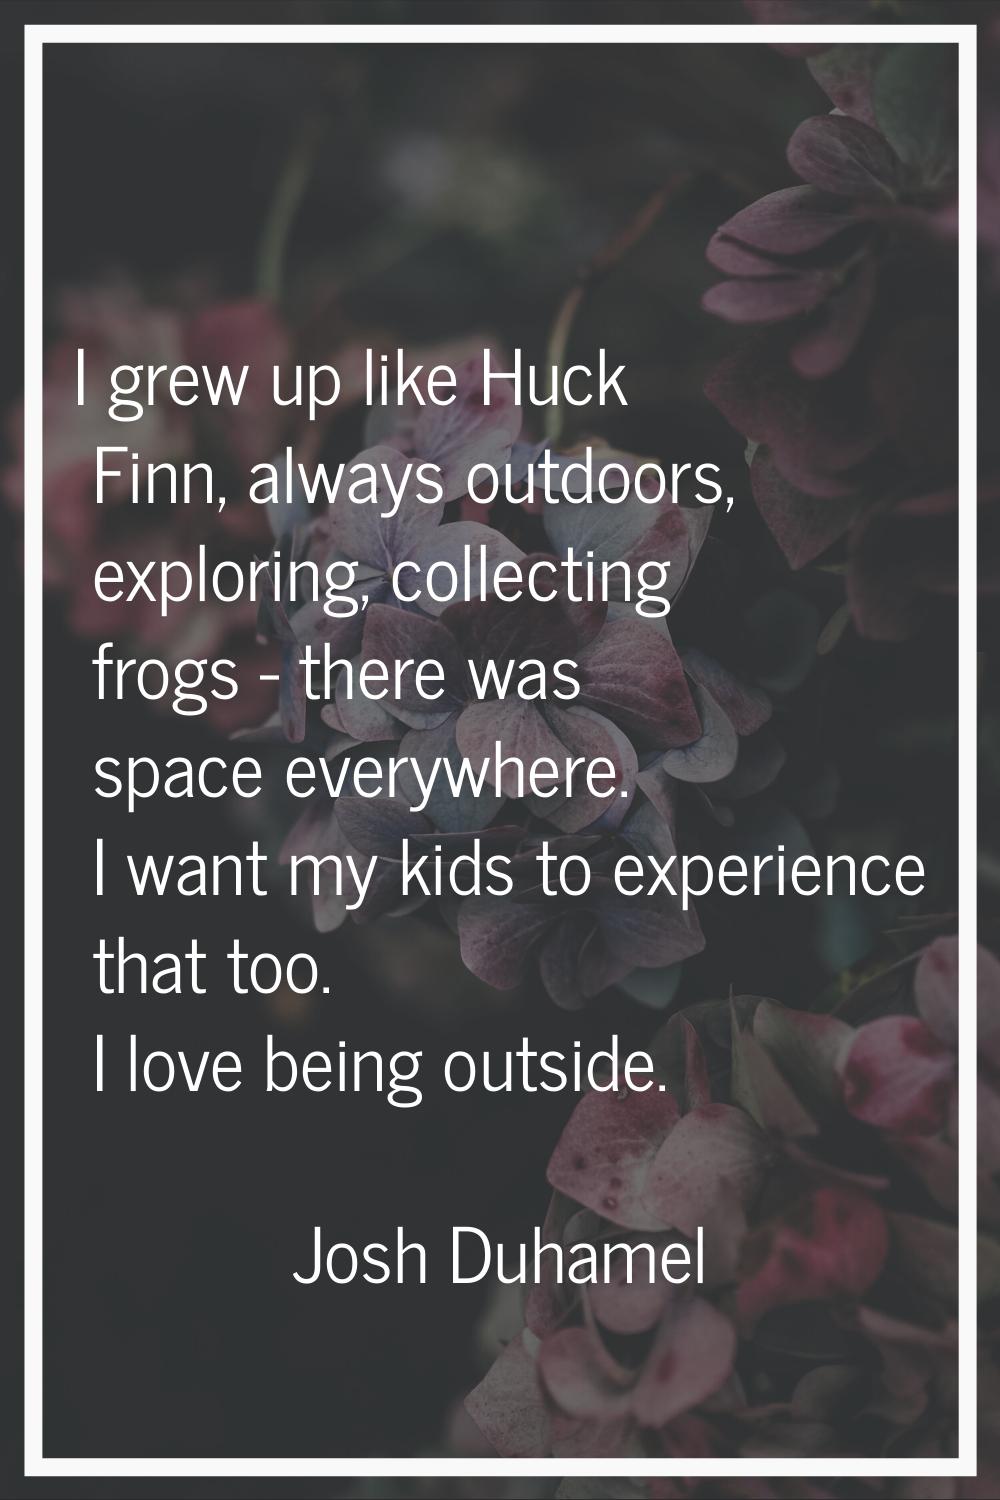 I grew up like Huck Finn, always outdoors, exploring, collecting frogs - there was space everywhere